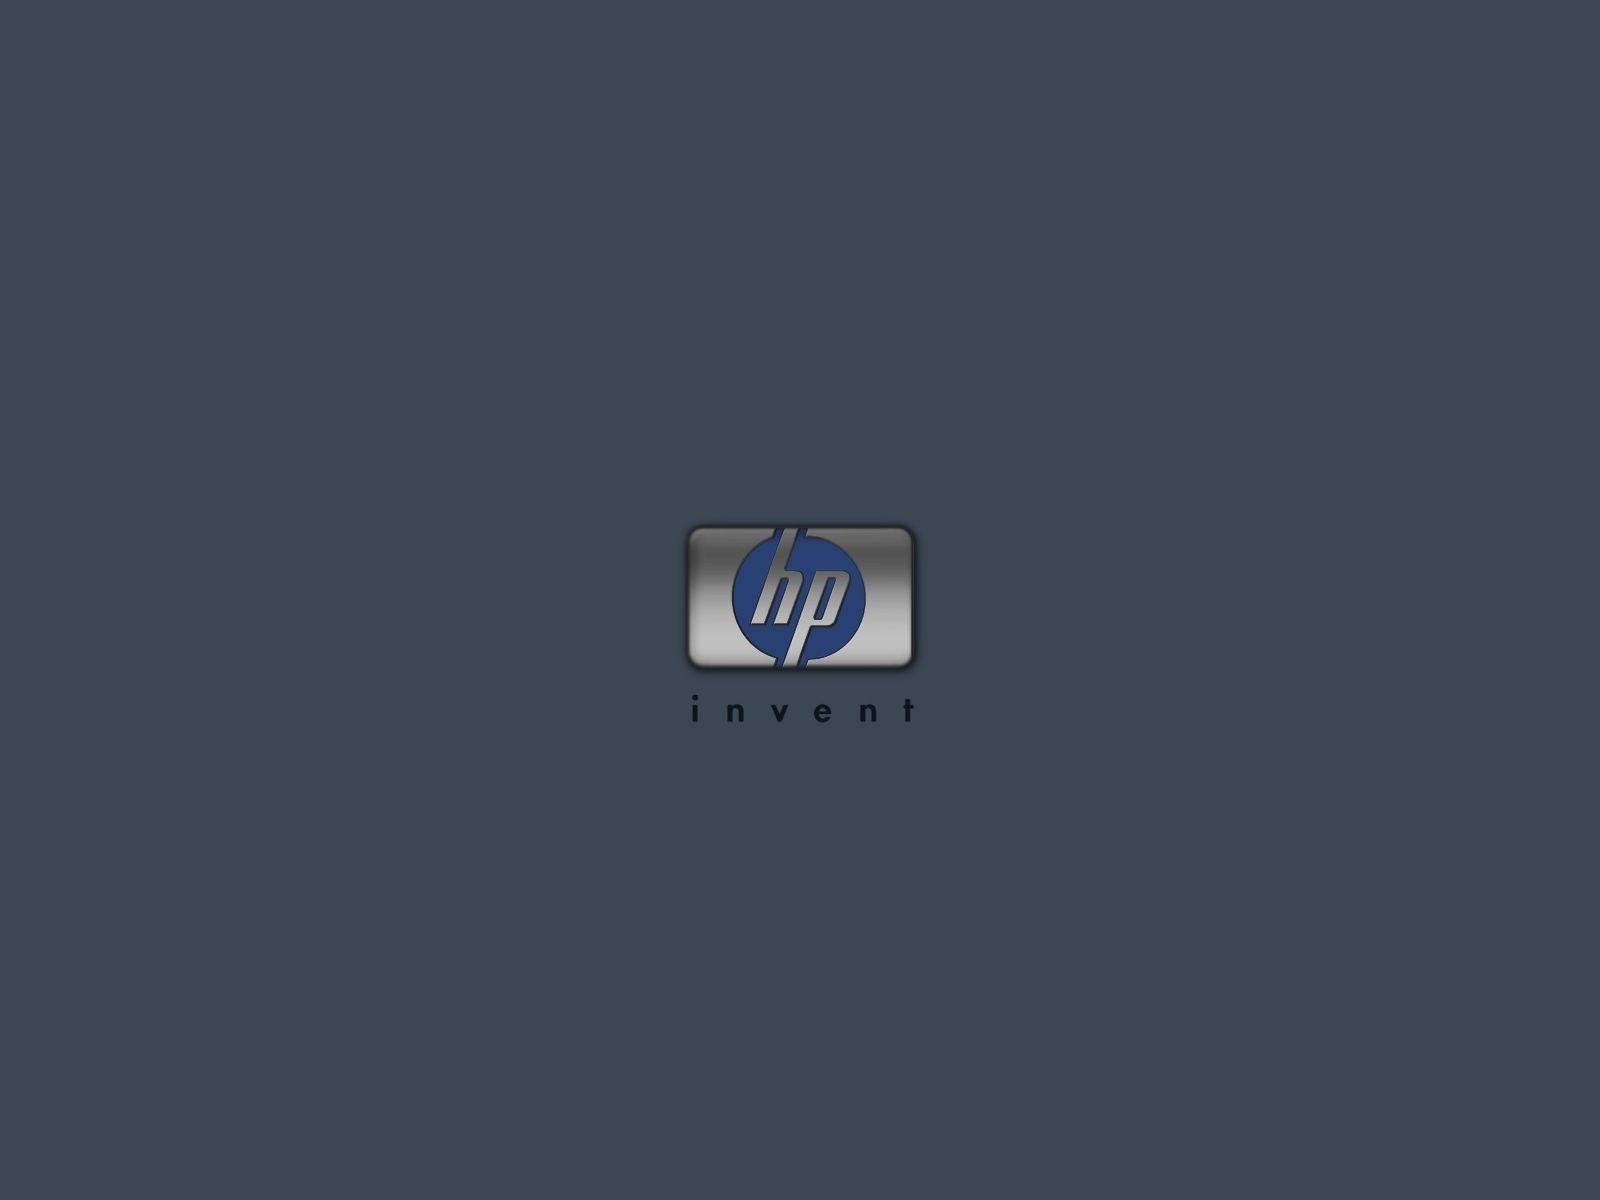 HP Invent Intel Logo - Hp Invent wallpapers | Hp Invent stock photos